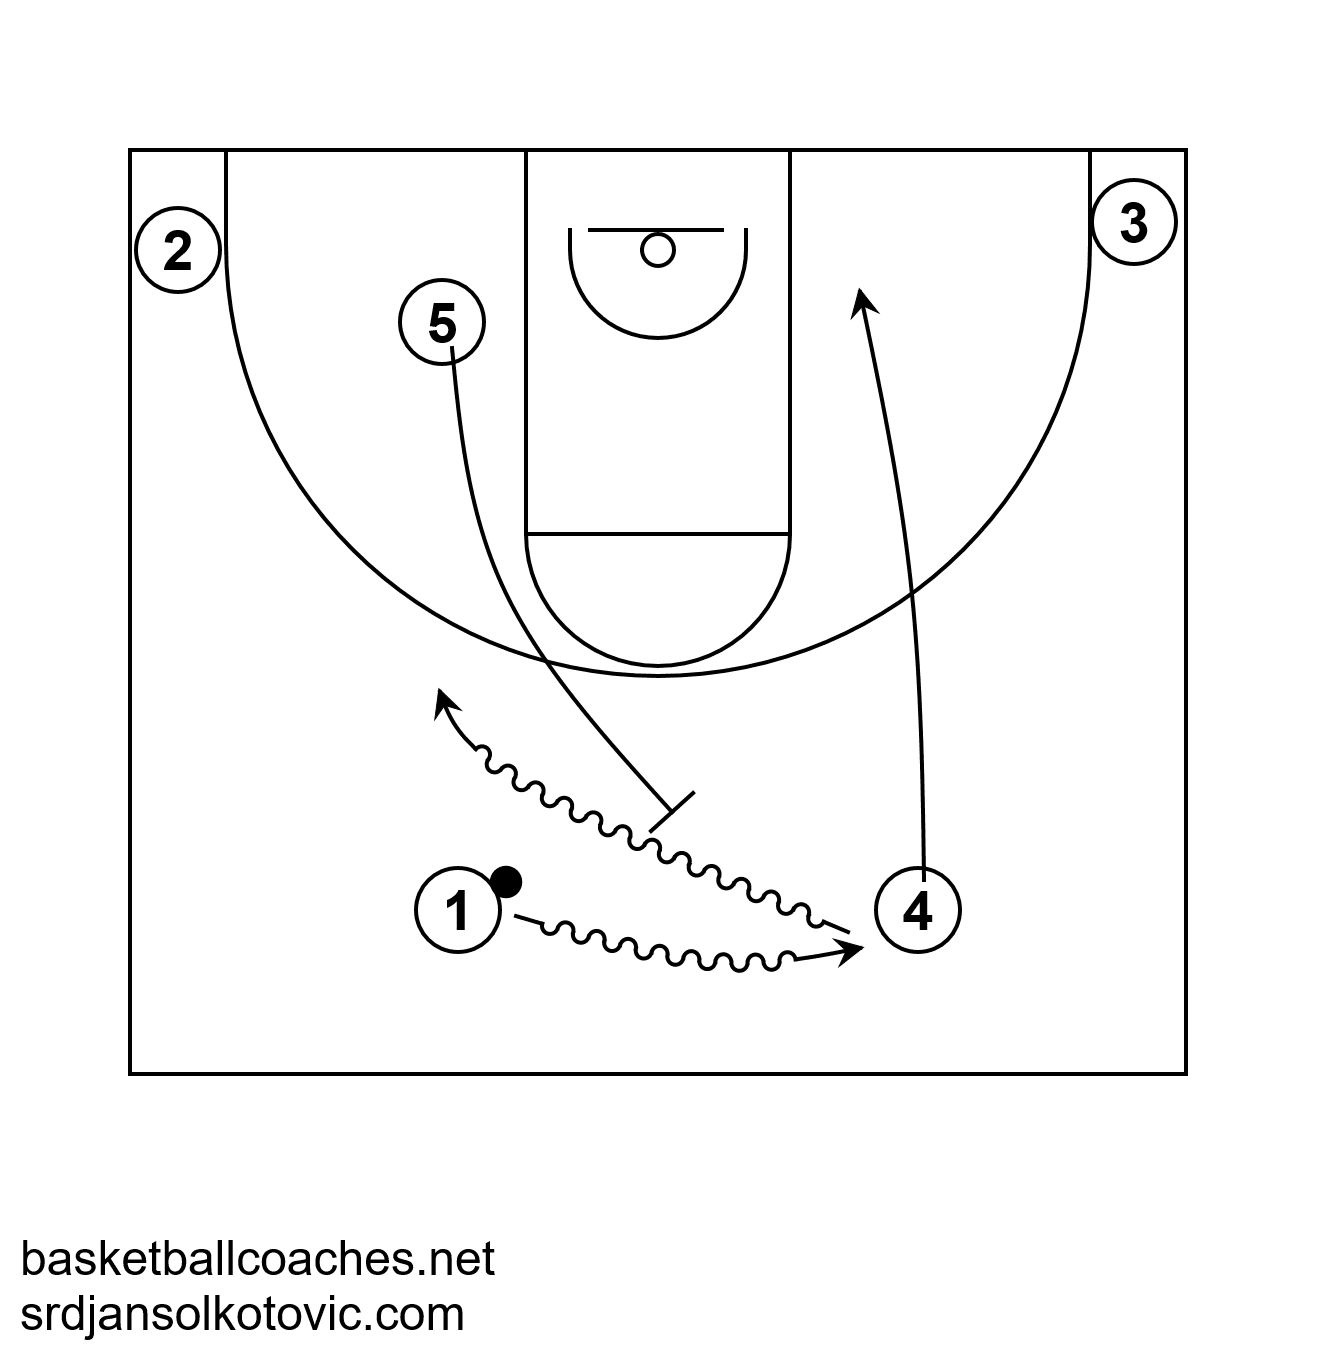 Basketball Terminology: Drive Pick and Roll